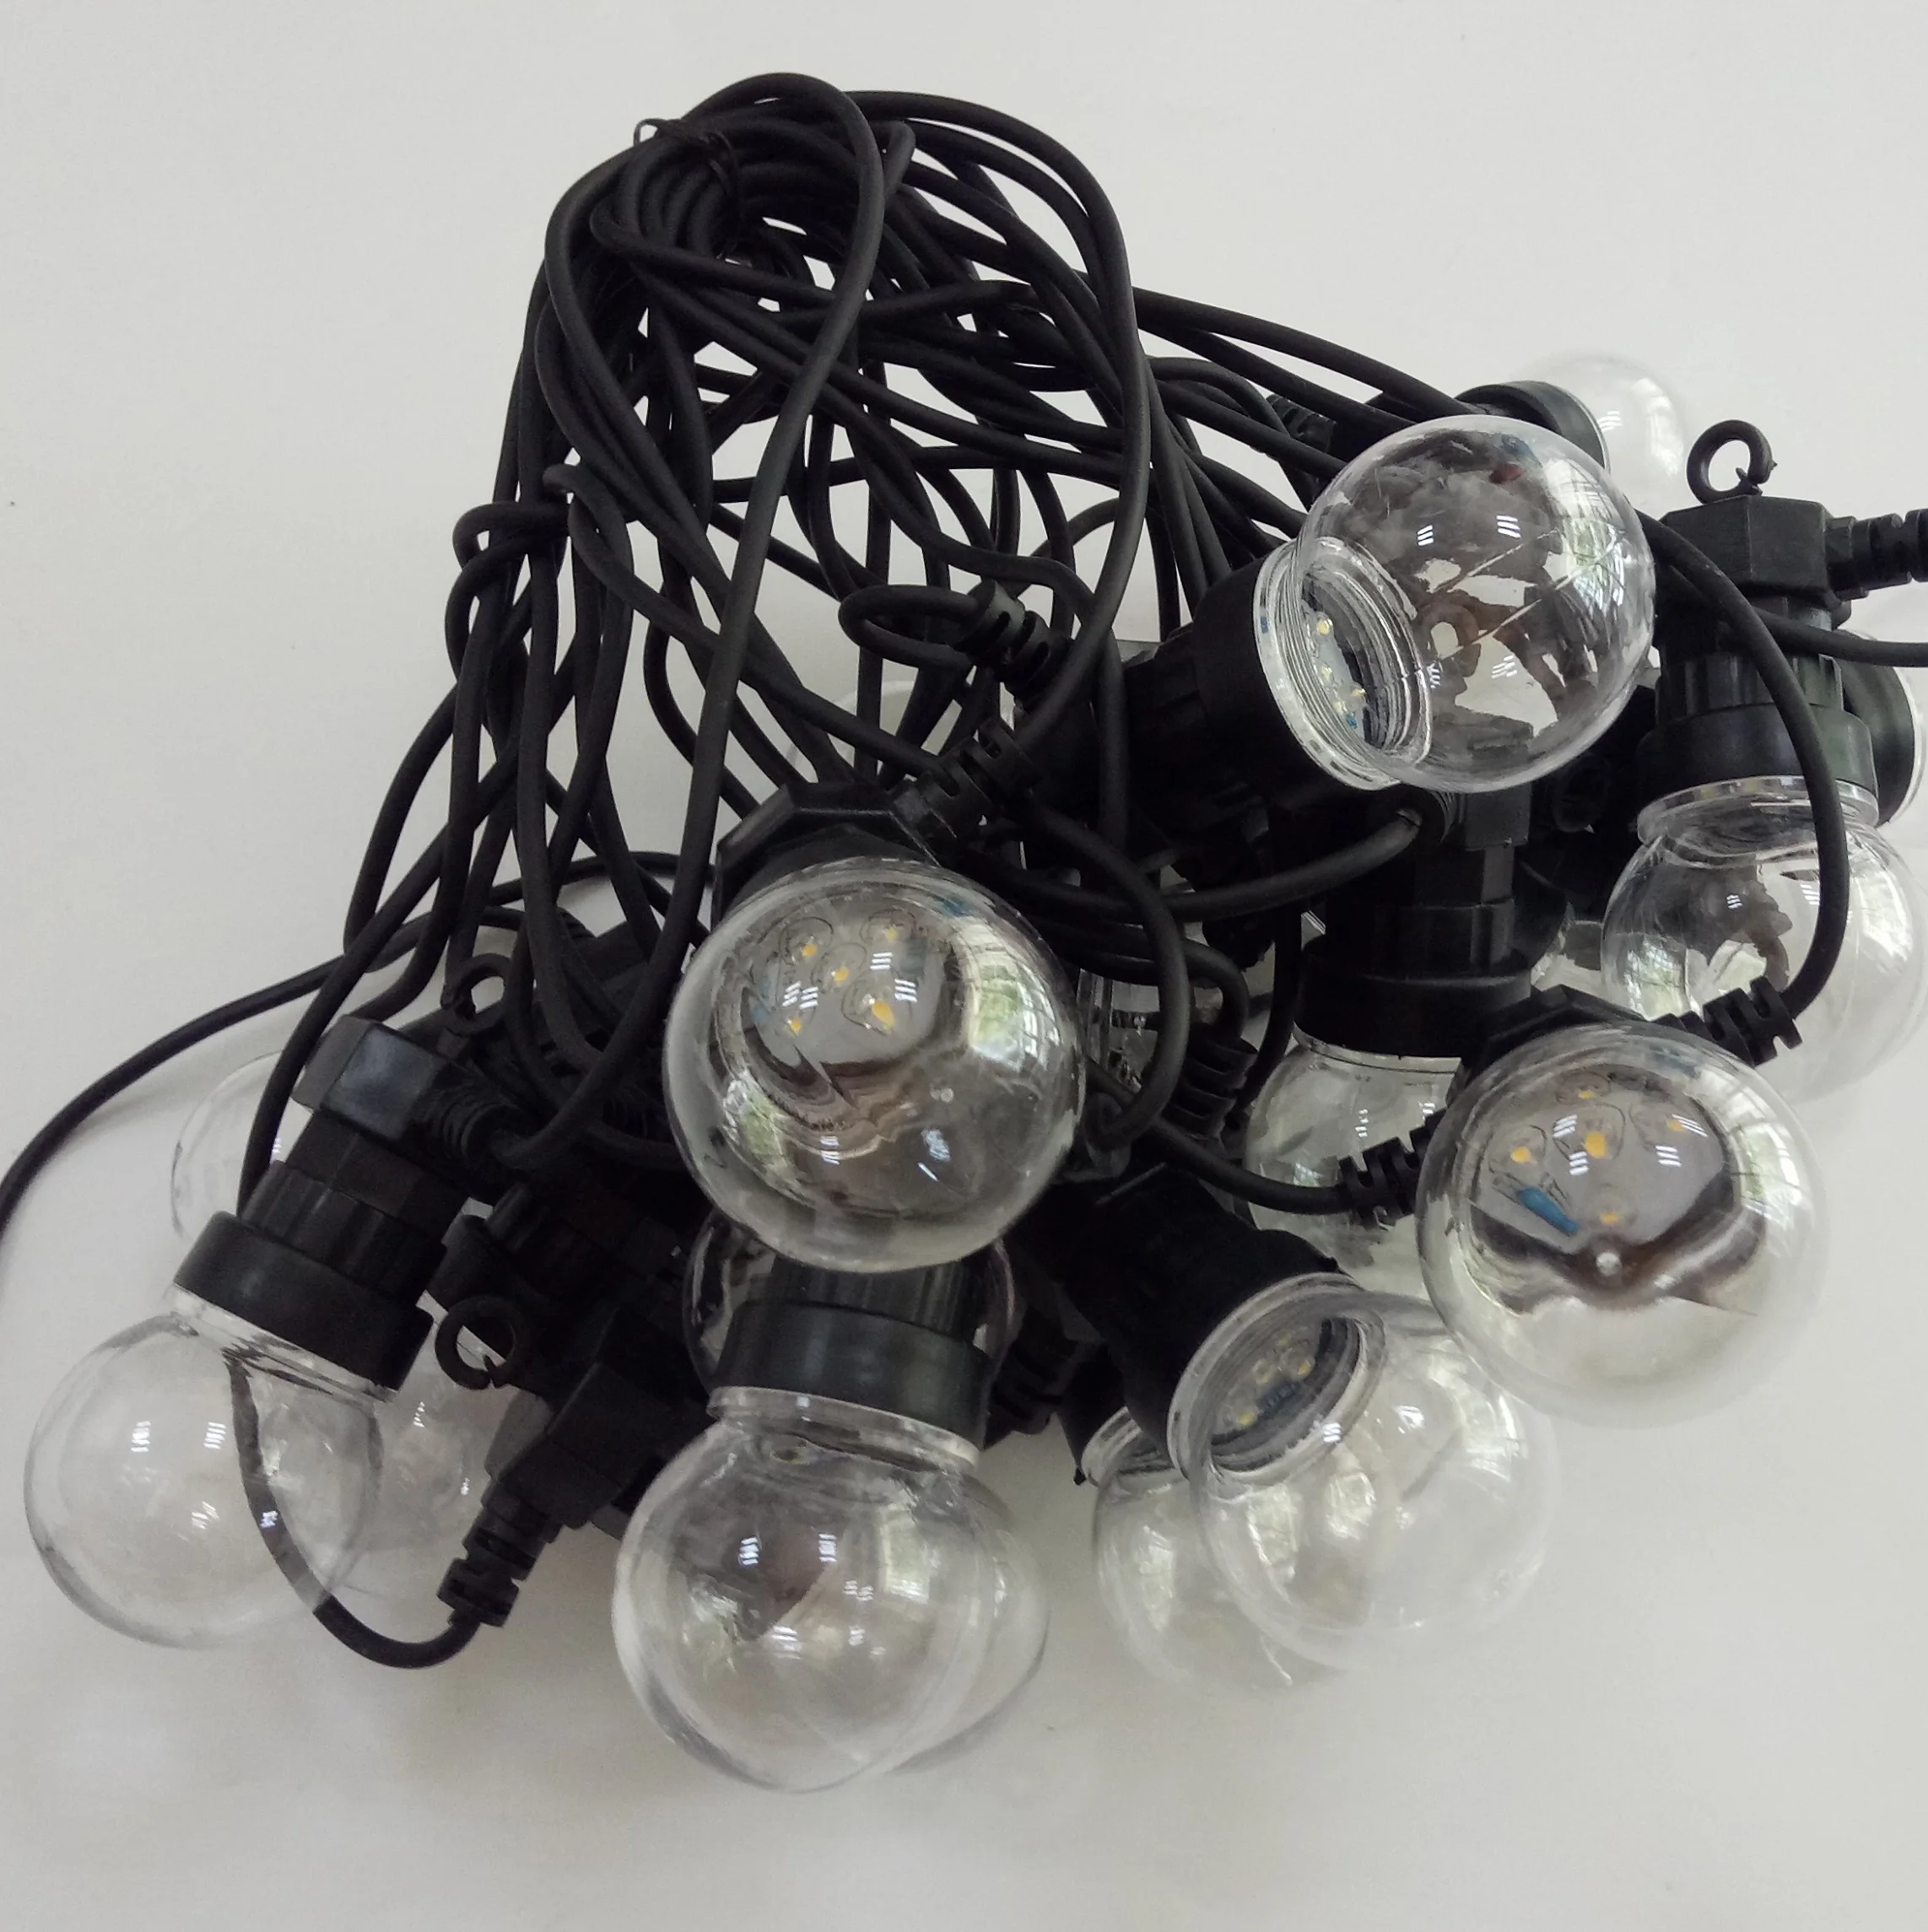 10m 20pcs Connectable Black Cable With G50 3000k Warm Globe Home Decorative Lights Supply Garden Party G50 Led String Light